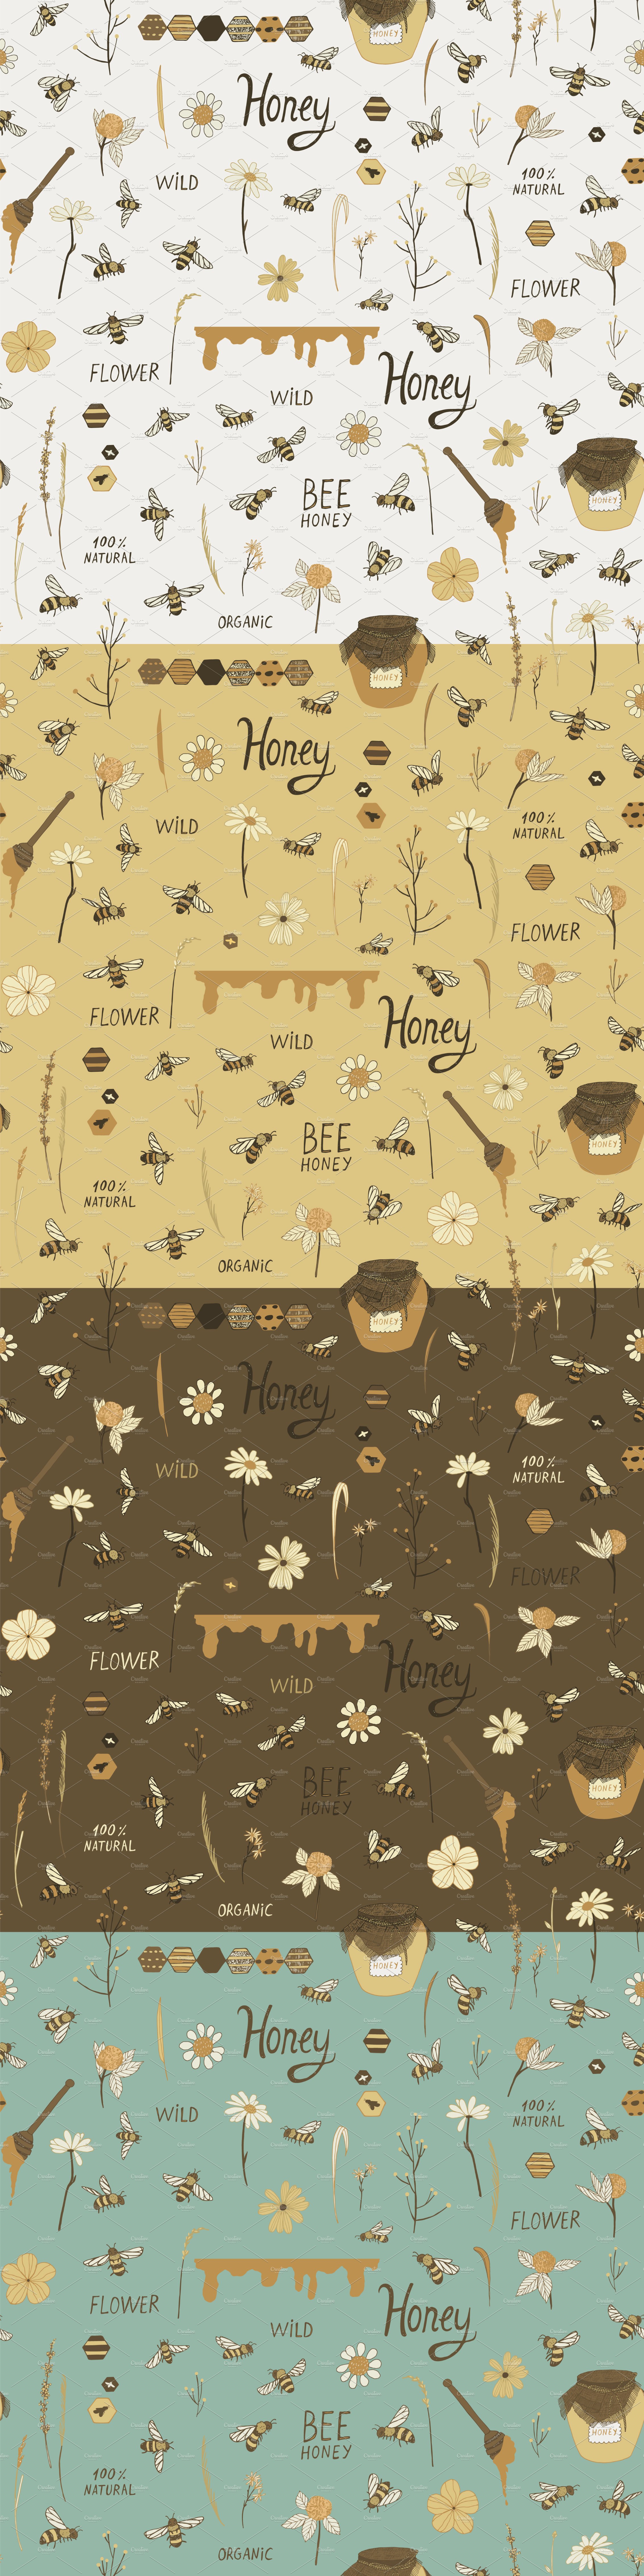 Bees and Honey preview image.